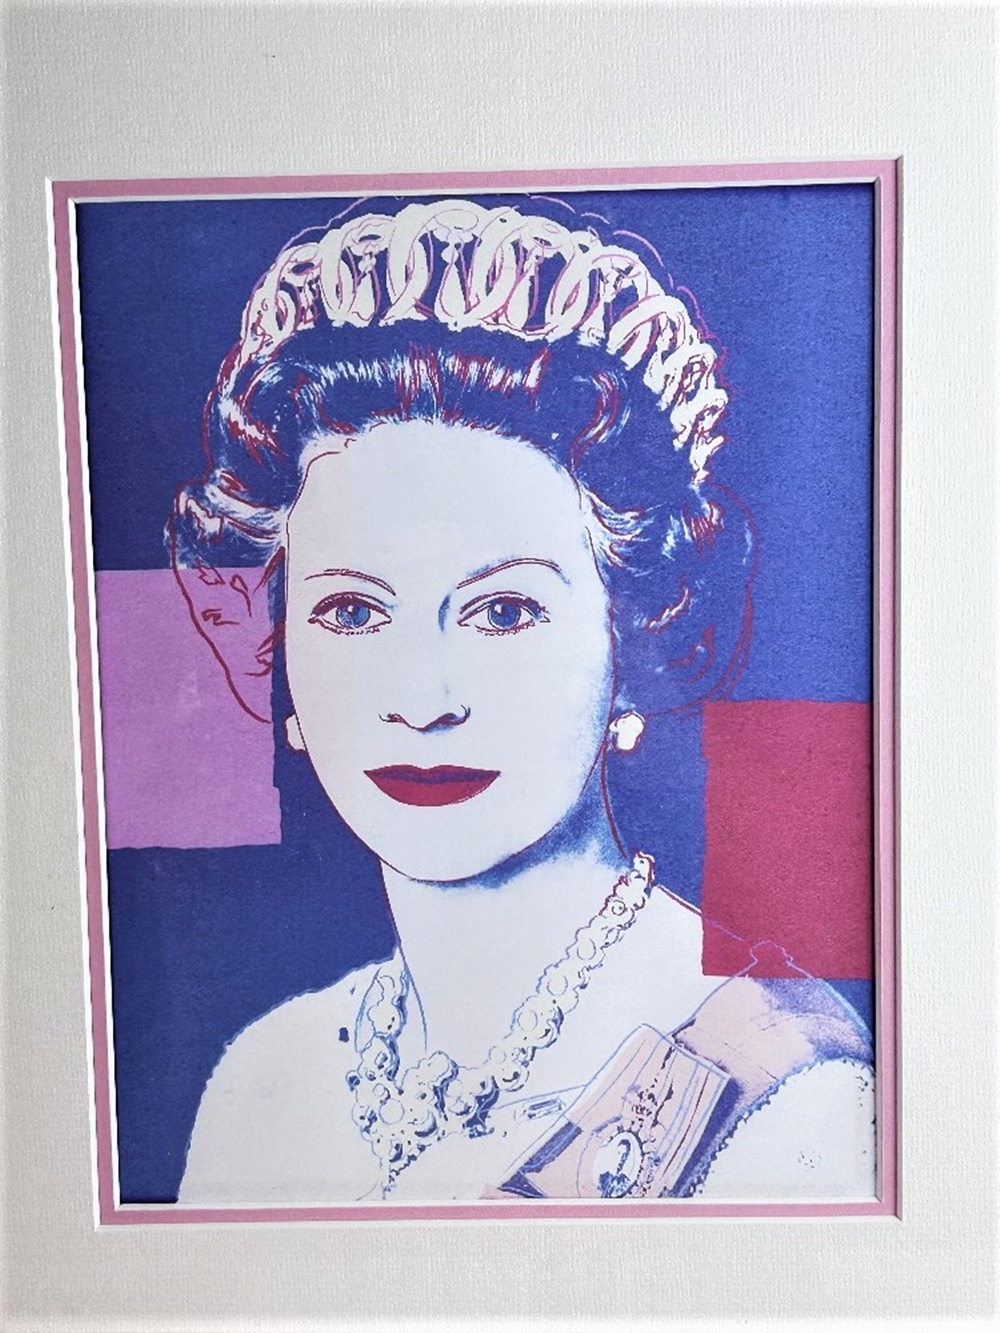 Andy Warhol (1928-1987) &#8220;Elizabeth &#8221; 1987 Edition Lithograph - Image 3 of 7